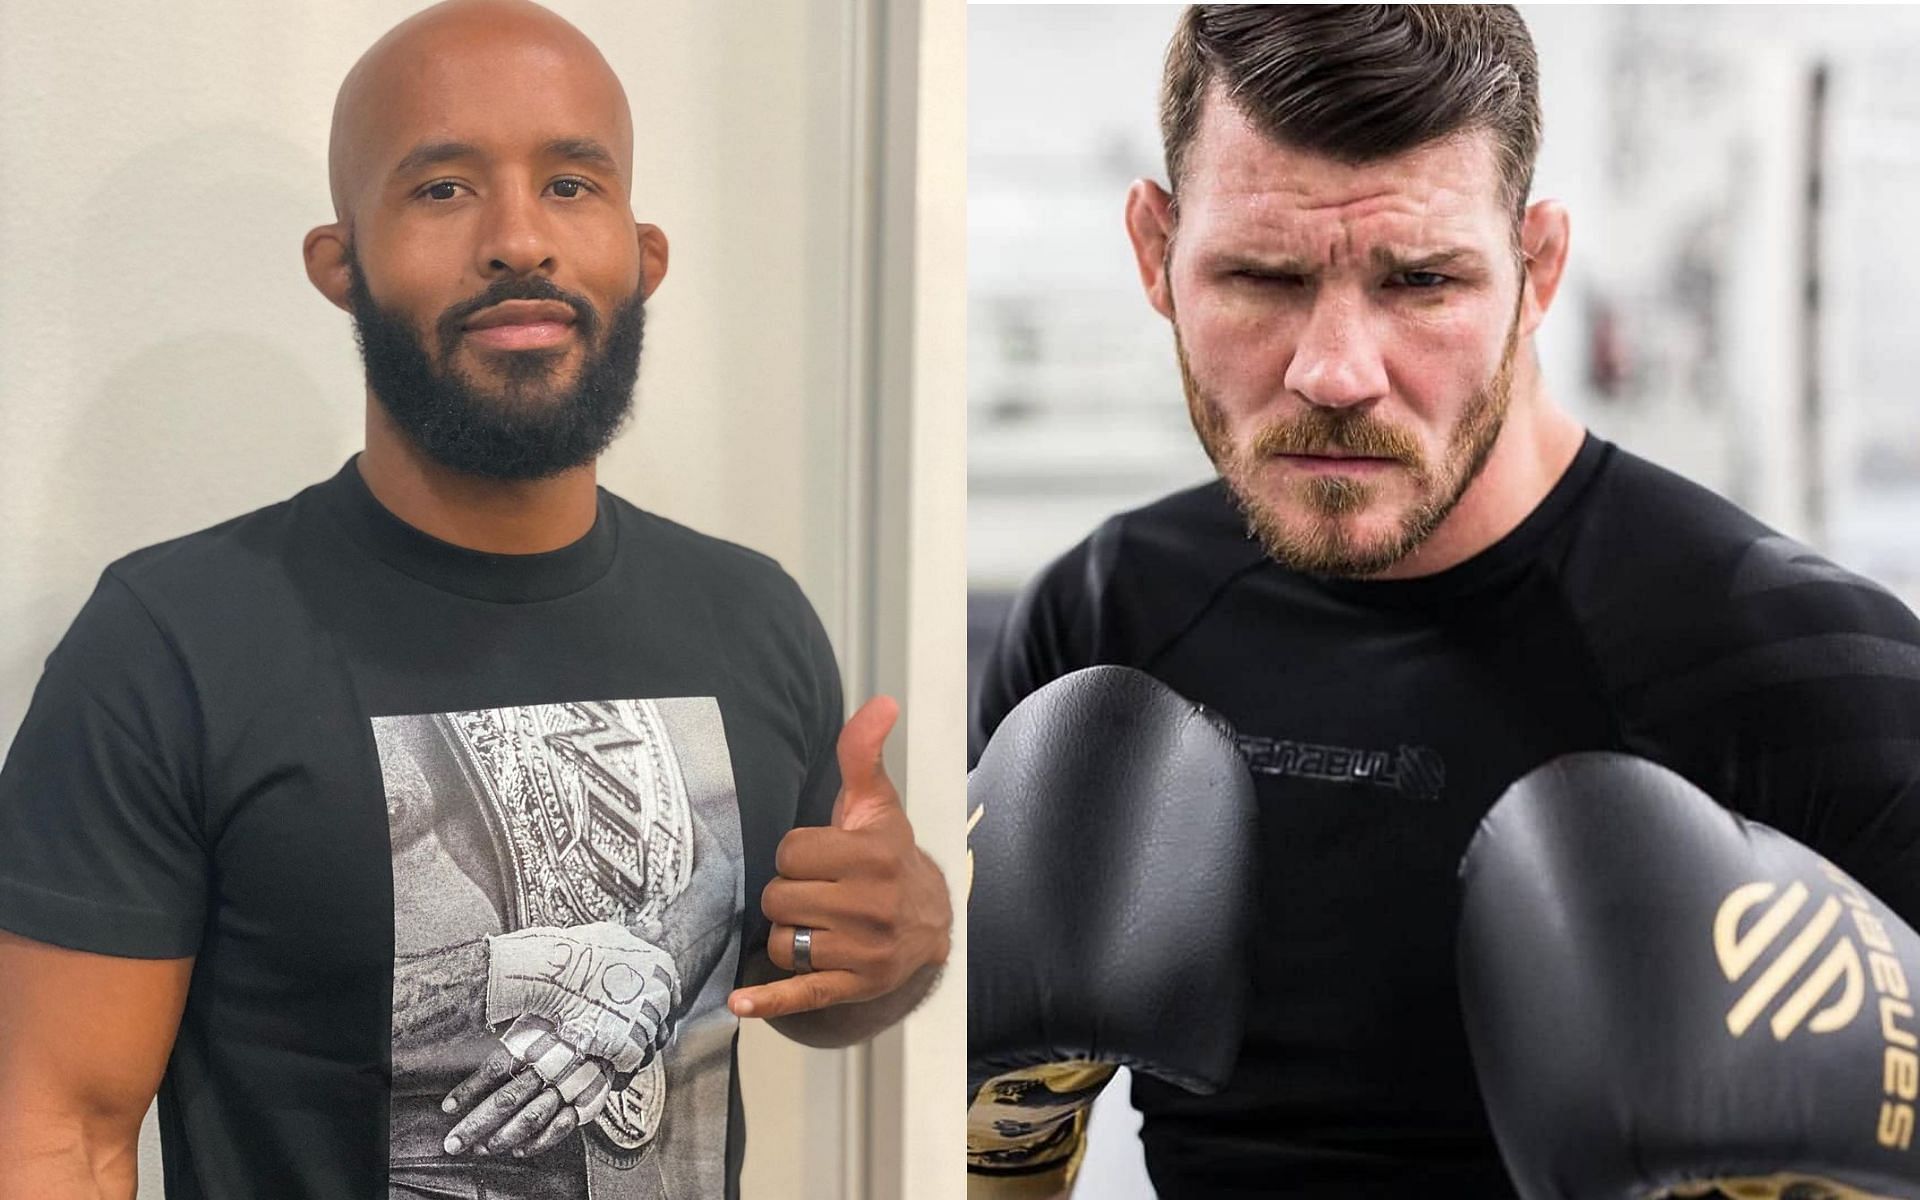 Demetrious Johnson (left) and Michael Bisping (right) [Image Courtesy: @mighty and @mikelbpisping on Instagram]